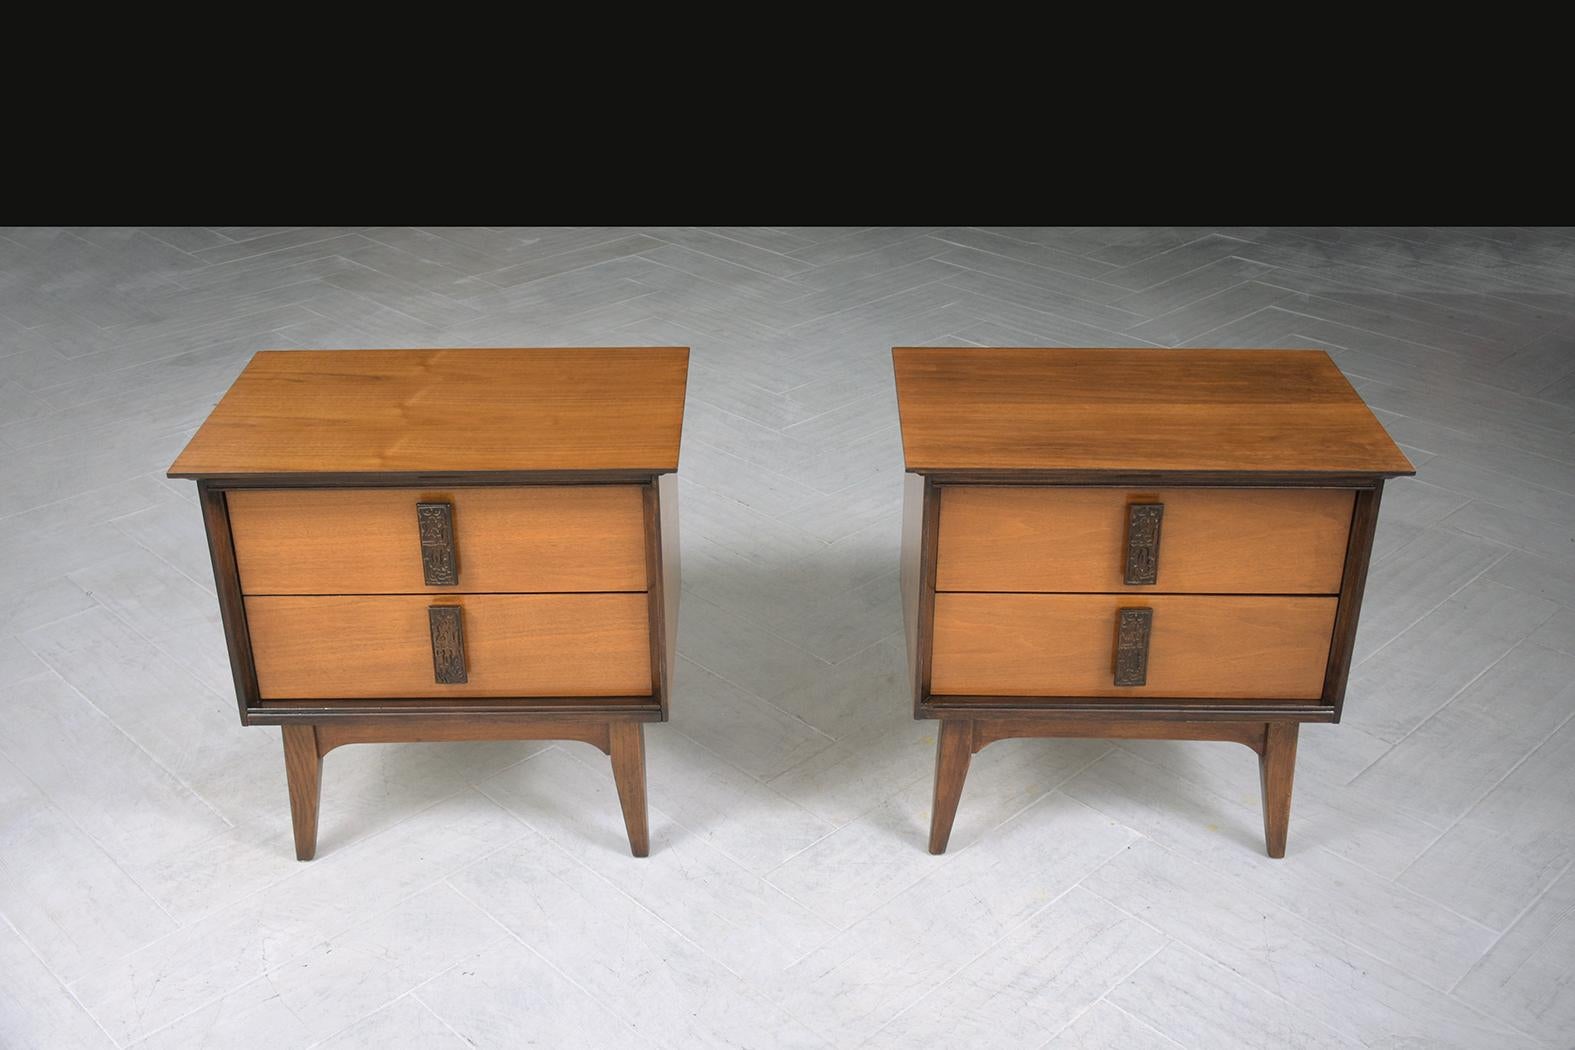 An extraordinary pair of 1960s American Martinsville nightstands are hand-crafted out of walnut and are in great condition and completely restored and refinished by our professional craftsmen team. These mid-century modern bedside tables are